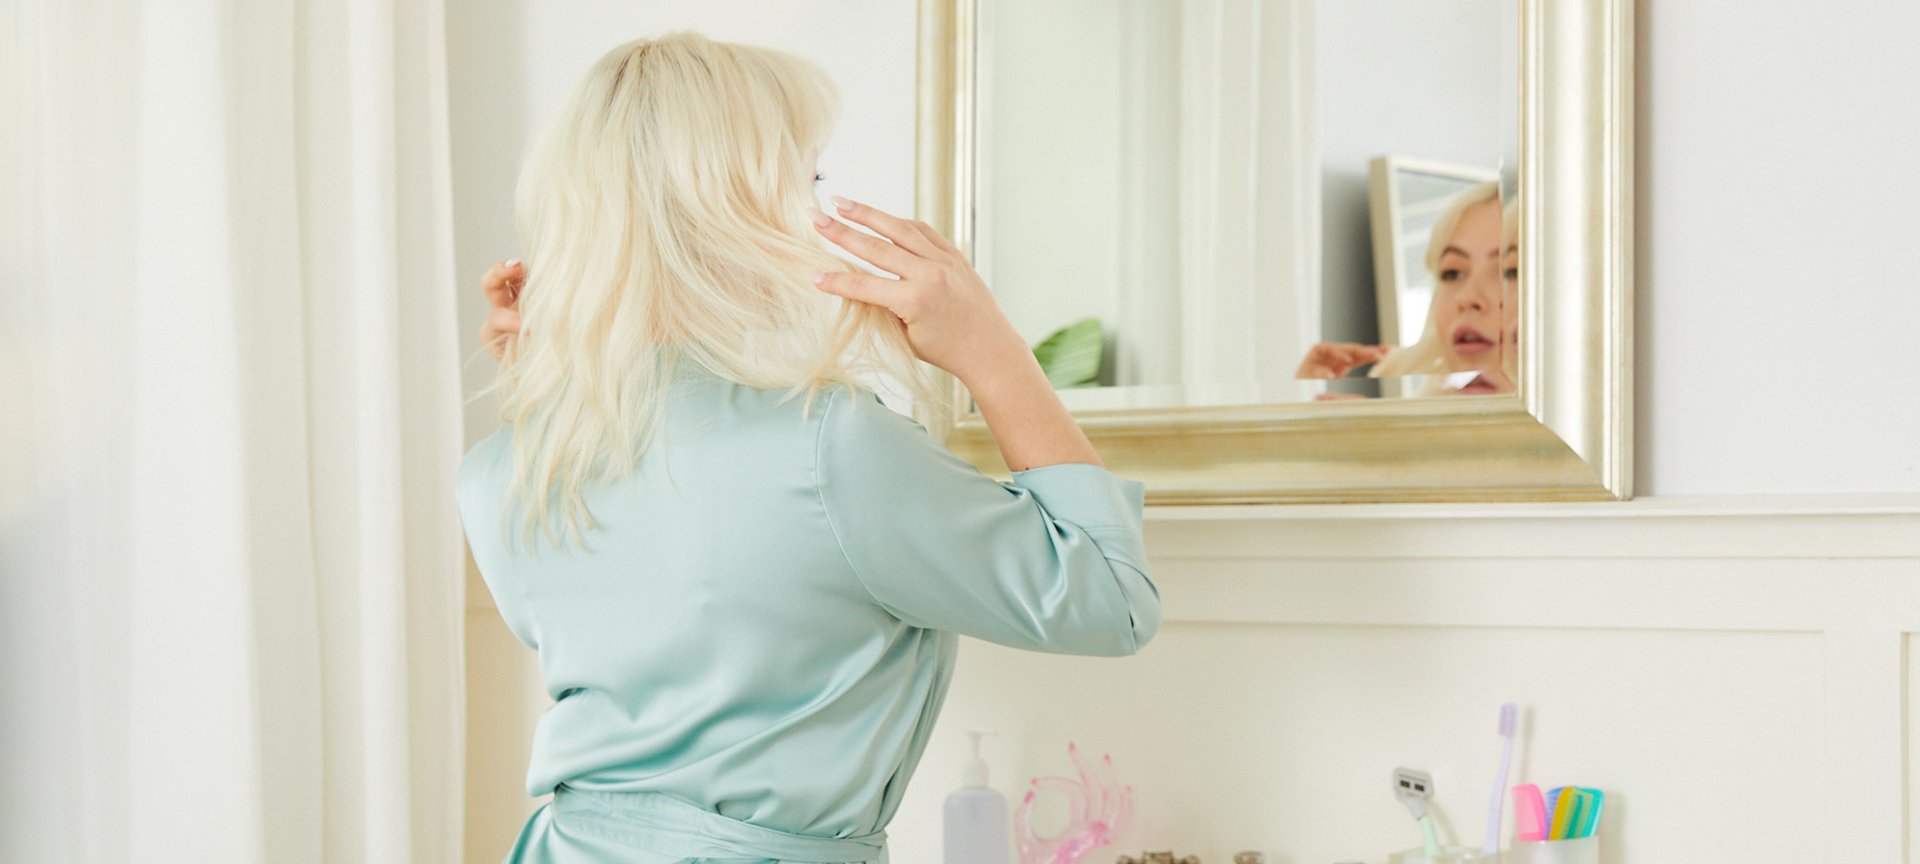 How To Refresh Hair Color At Home